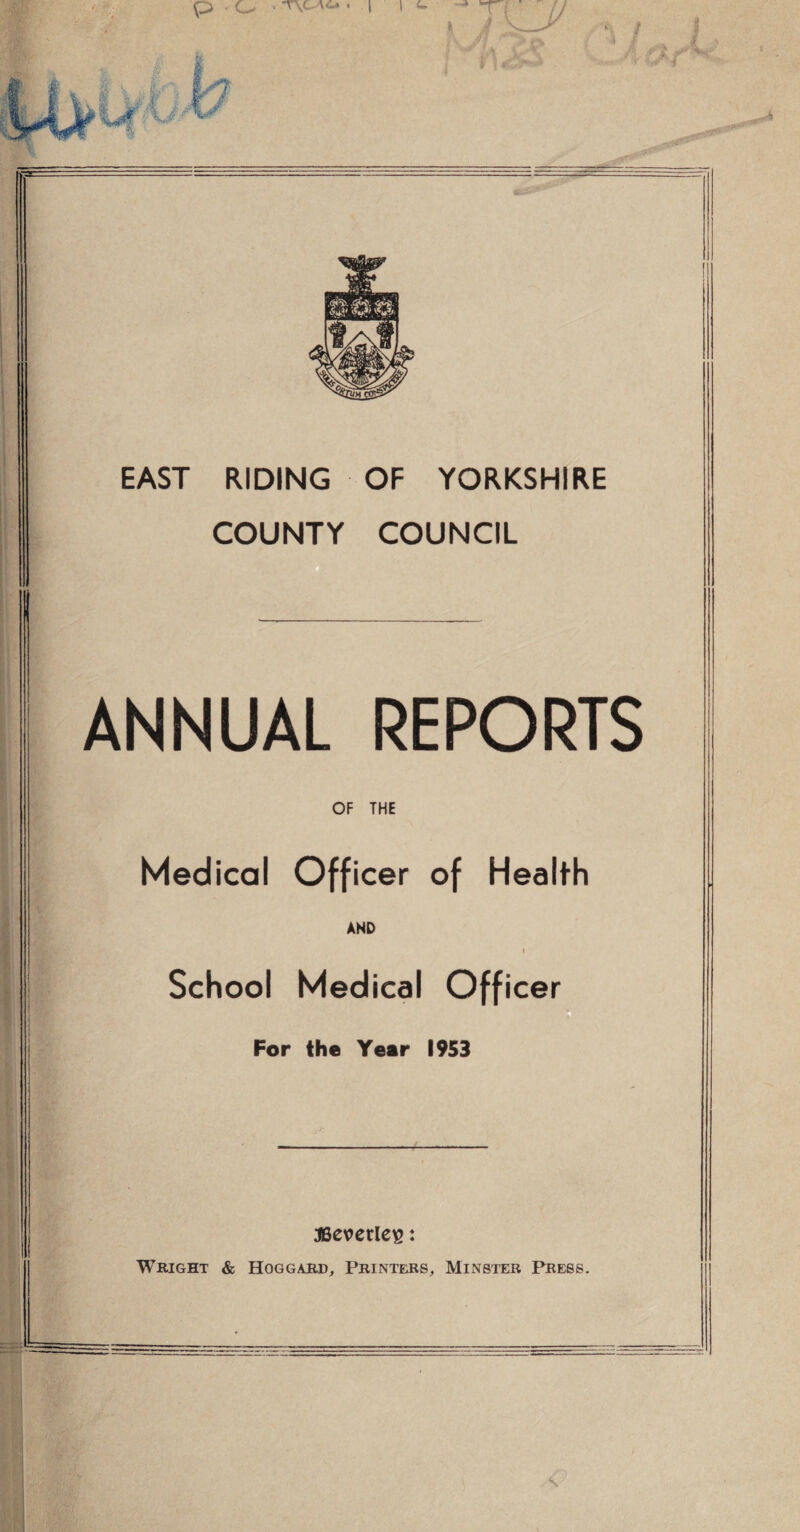 EAST RIDING OF YORKSHIRE COUNTY COUNCIL ANNUAL REPORTS OF THE Medical Officer of Health AND i School Medical Officer For the Year 1953 JBevcrle^: Wright & Hoggarh, Printers, Minster Press.